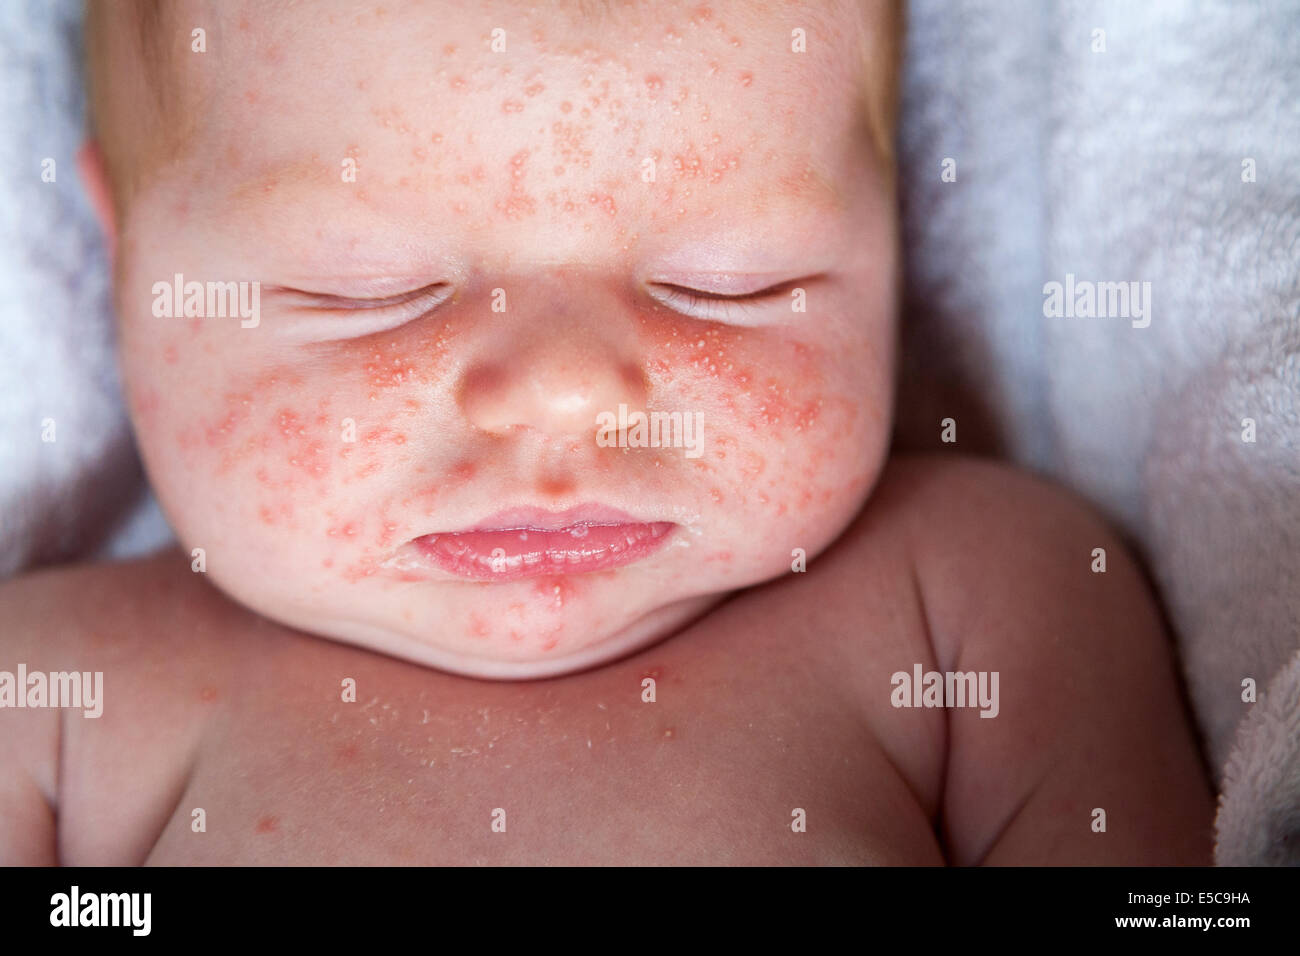 Two week old with - probably - neonatal baby acne or ' Erythema Stock